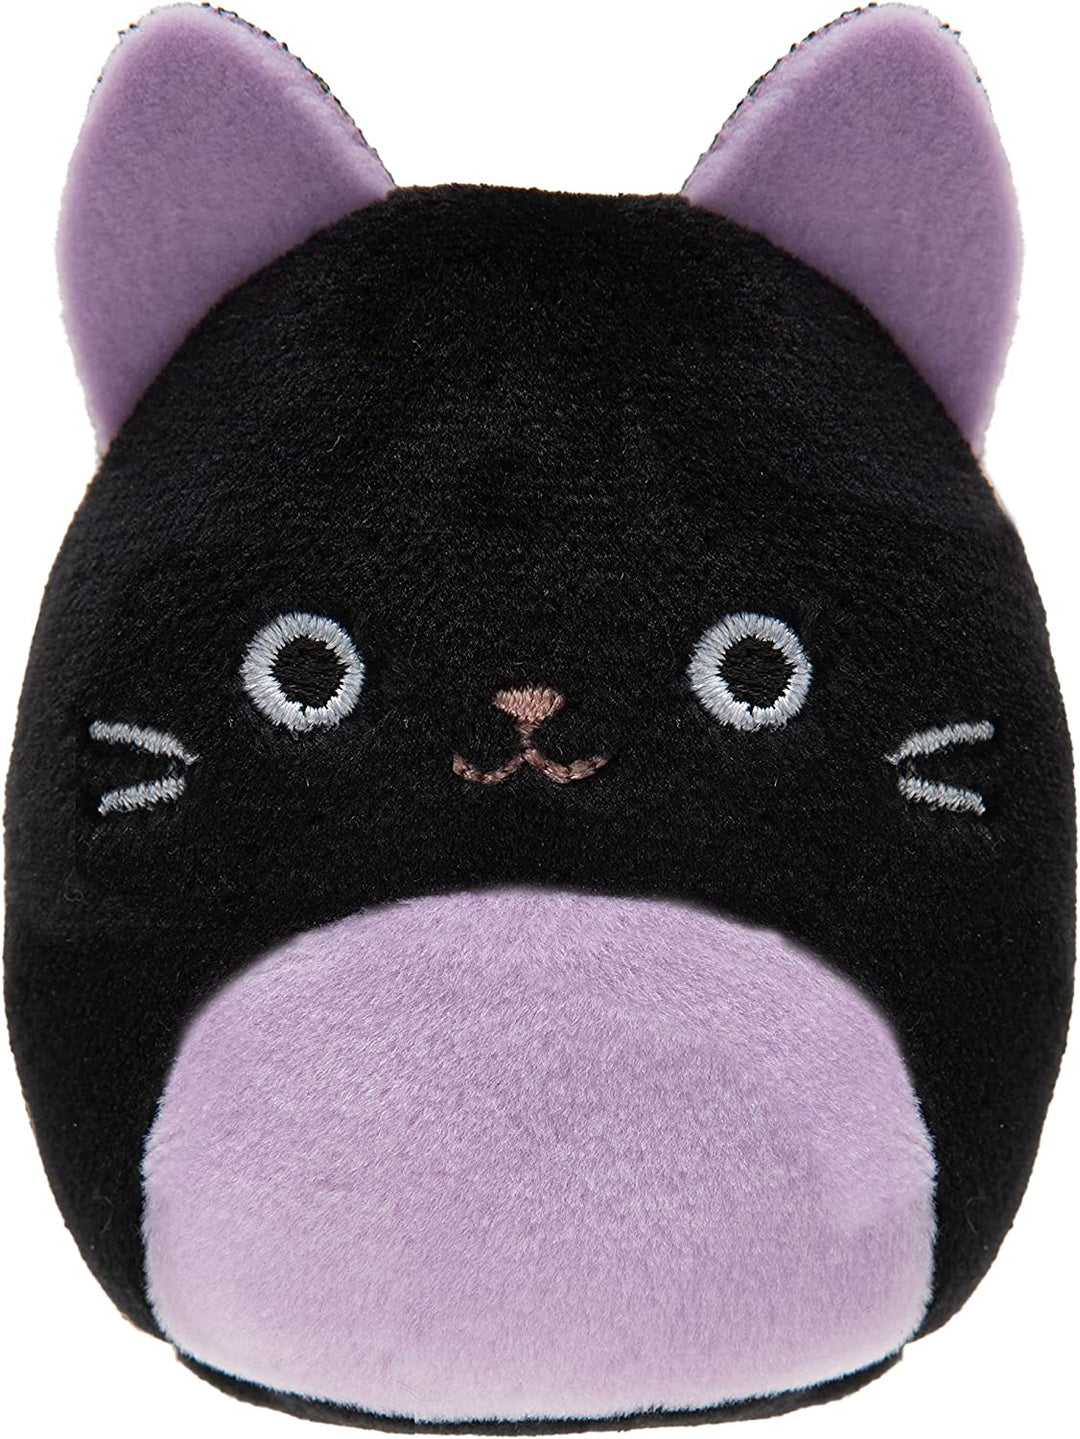 Squishville SQM0330 Pack of 6 Cuddly Purr-FECT Squad Six 2-Inch Plush-Toys for K